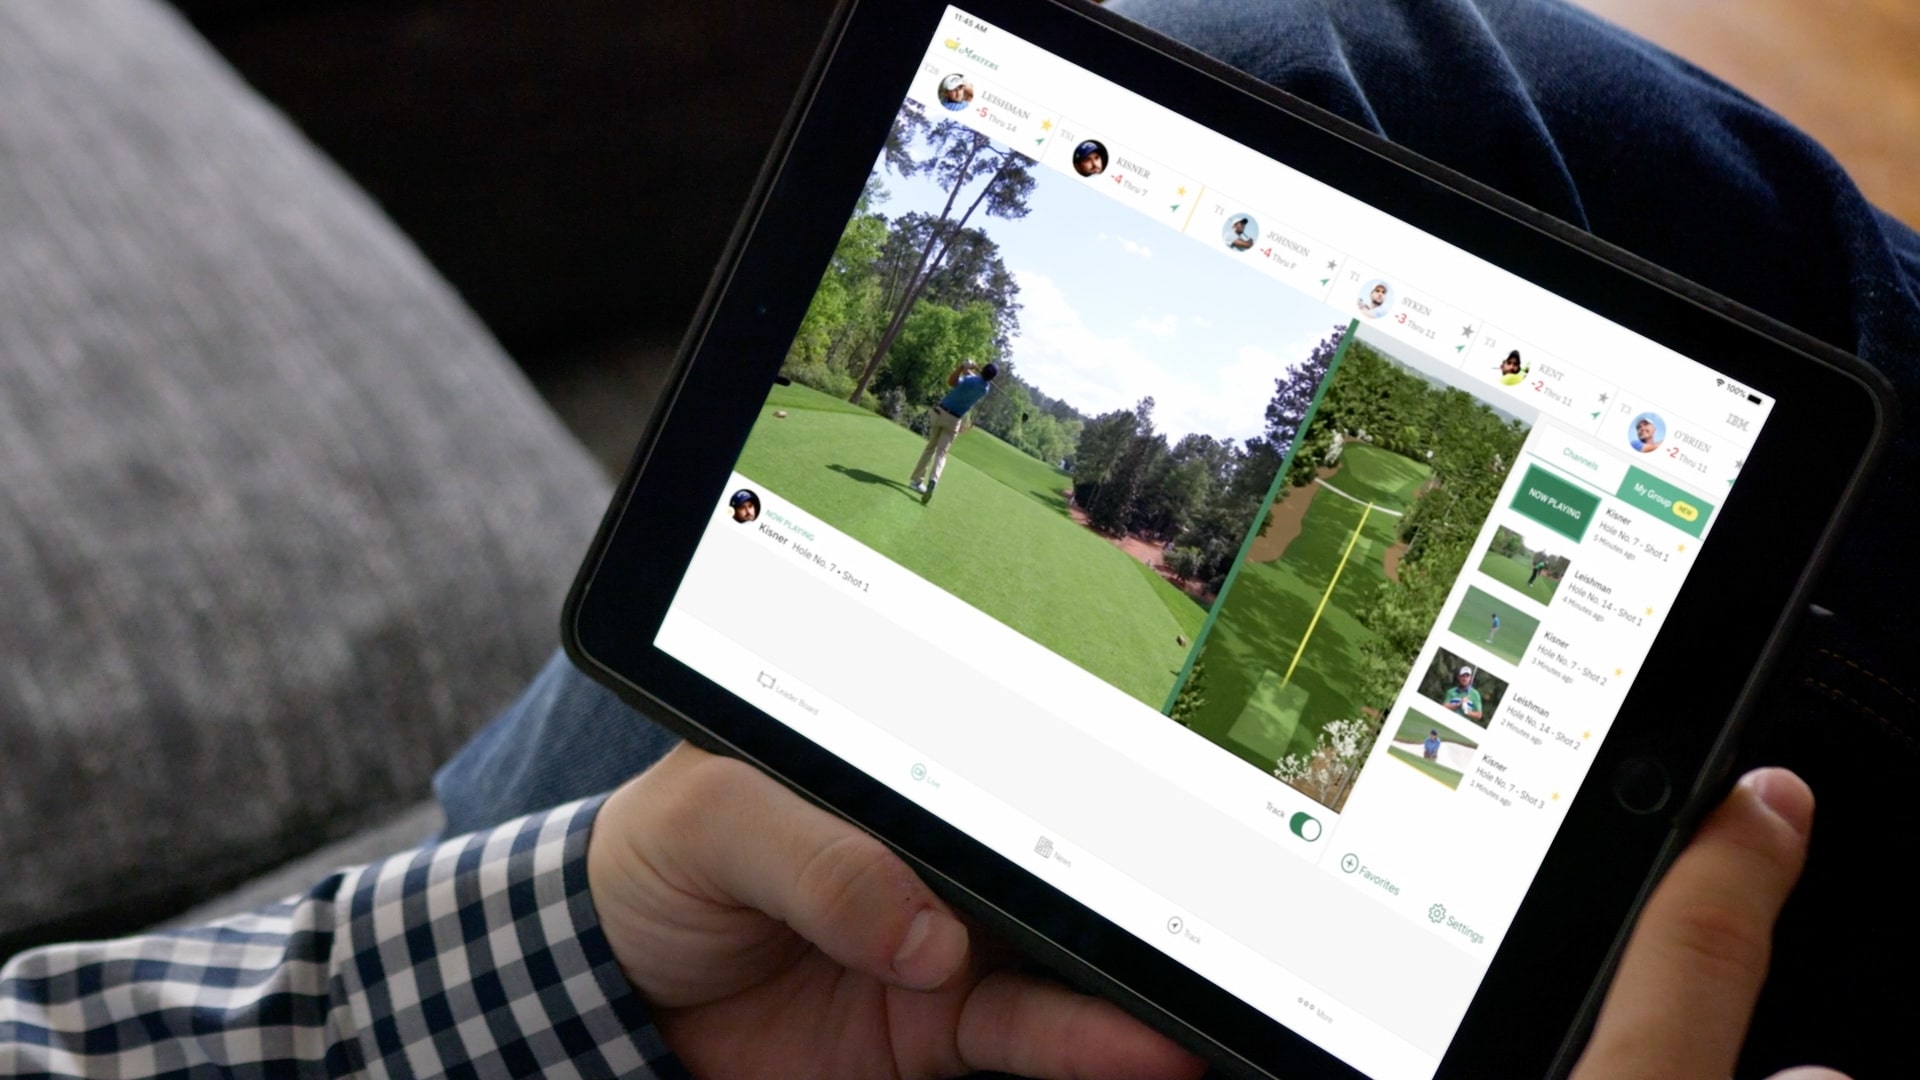 The new IBM-powered My Group feature is available in the Masters app, shown here on a tablet, or on Masters.com.